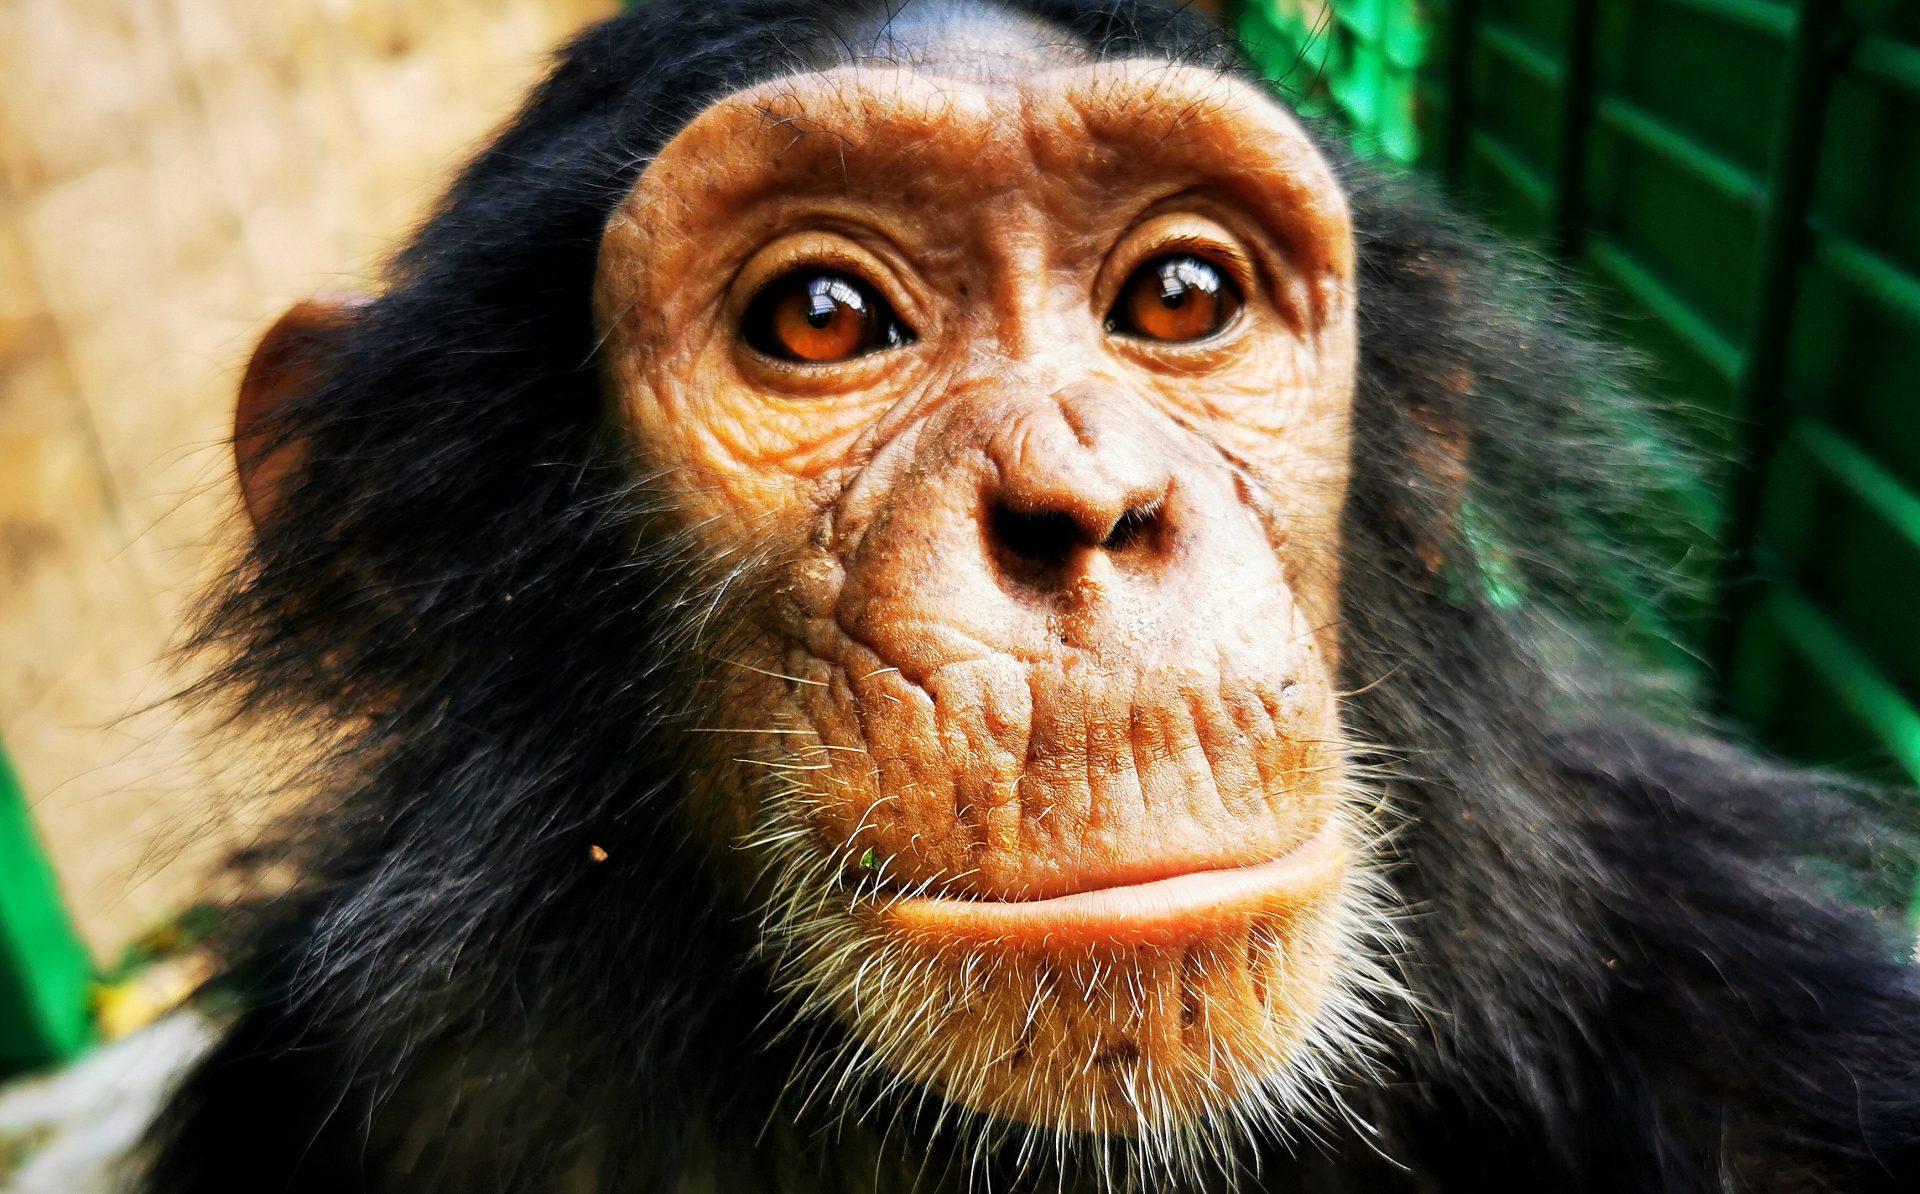 VIDA, 33rd confiscated chimpanzee handed over to J.A.C.K.